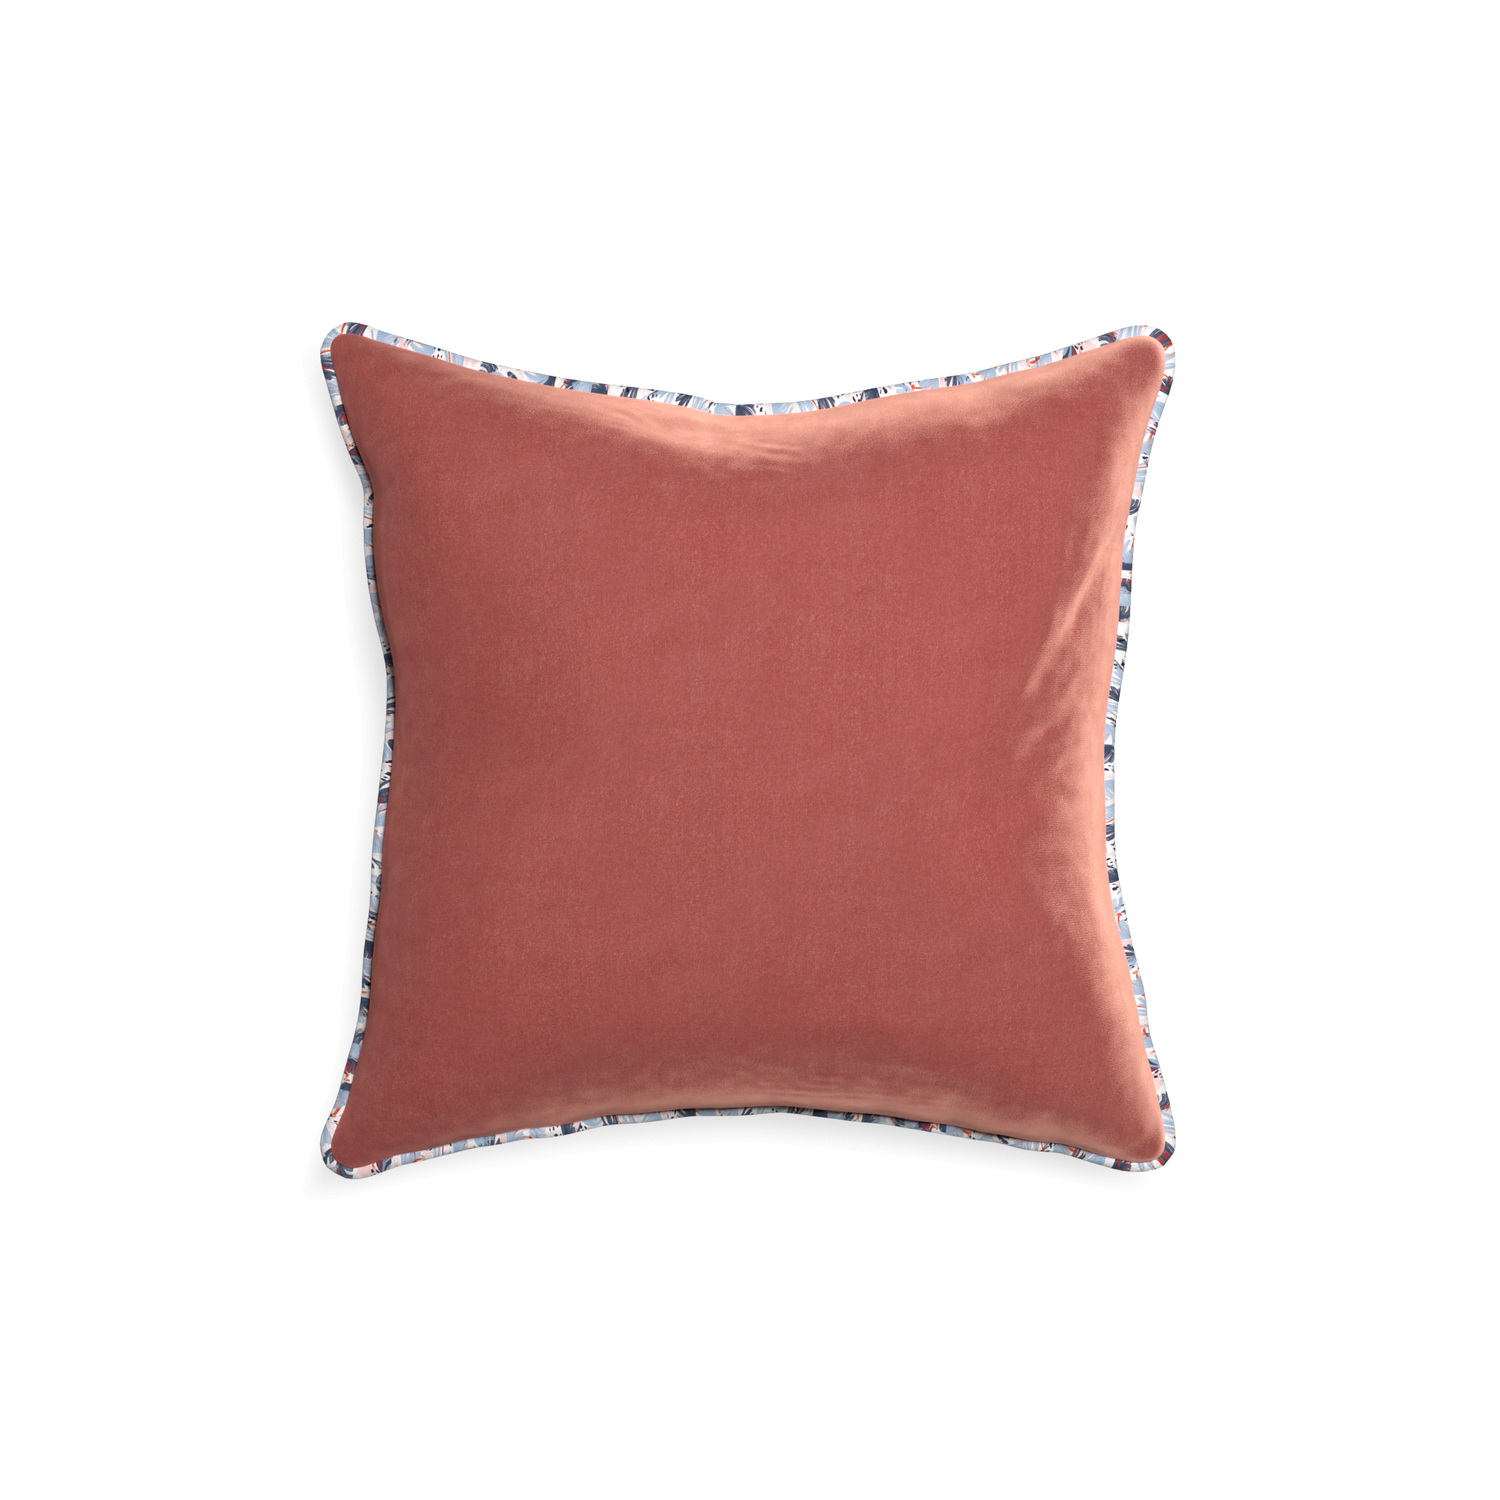 18-square cosmo velvet custom pillow with e piping on white background